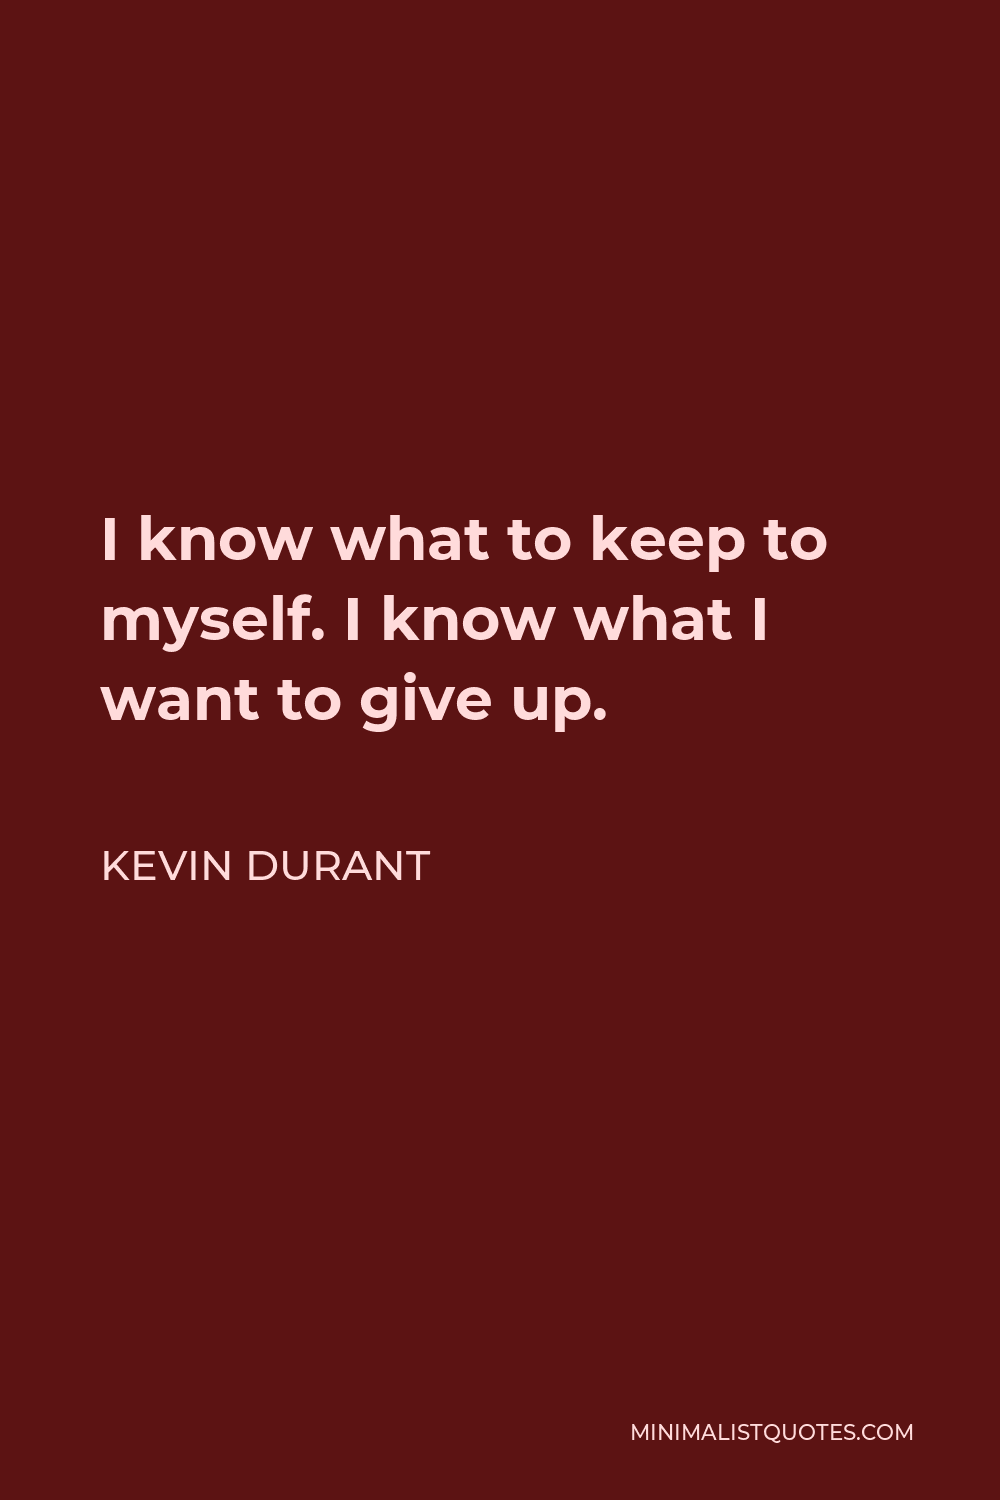 Kevin Durant Quote - I know what to keep to myself. I know what I want to give up.